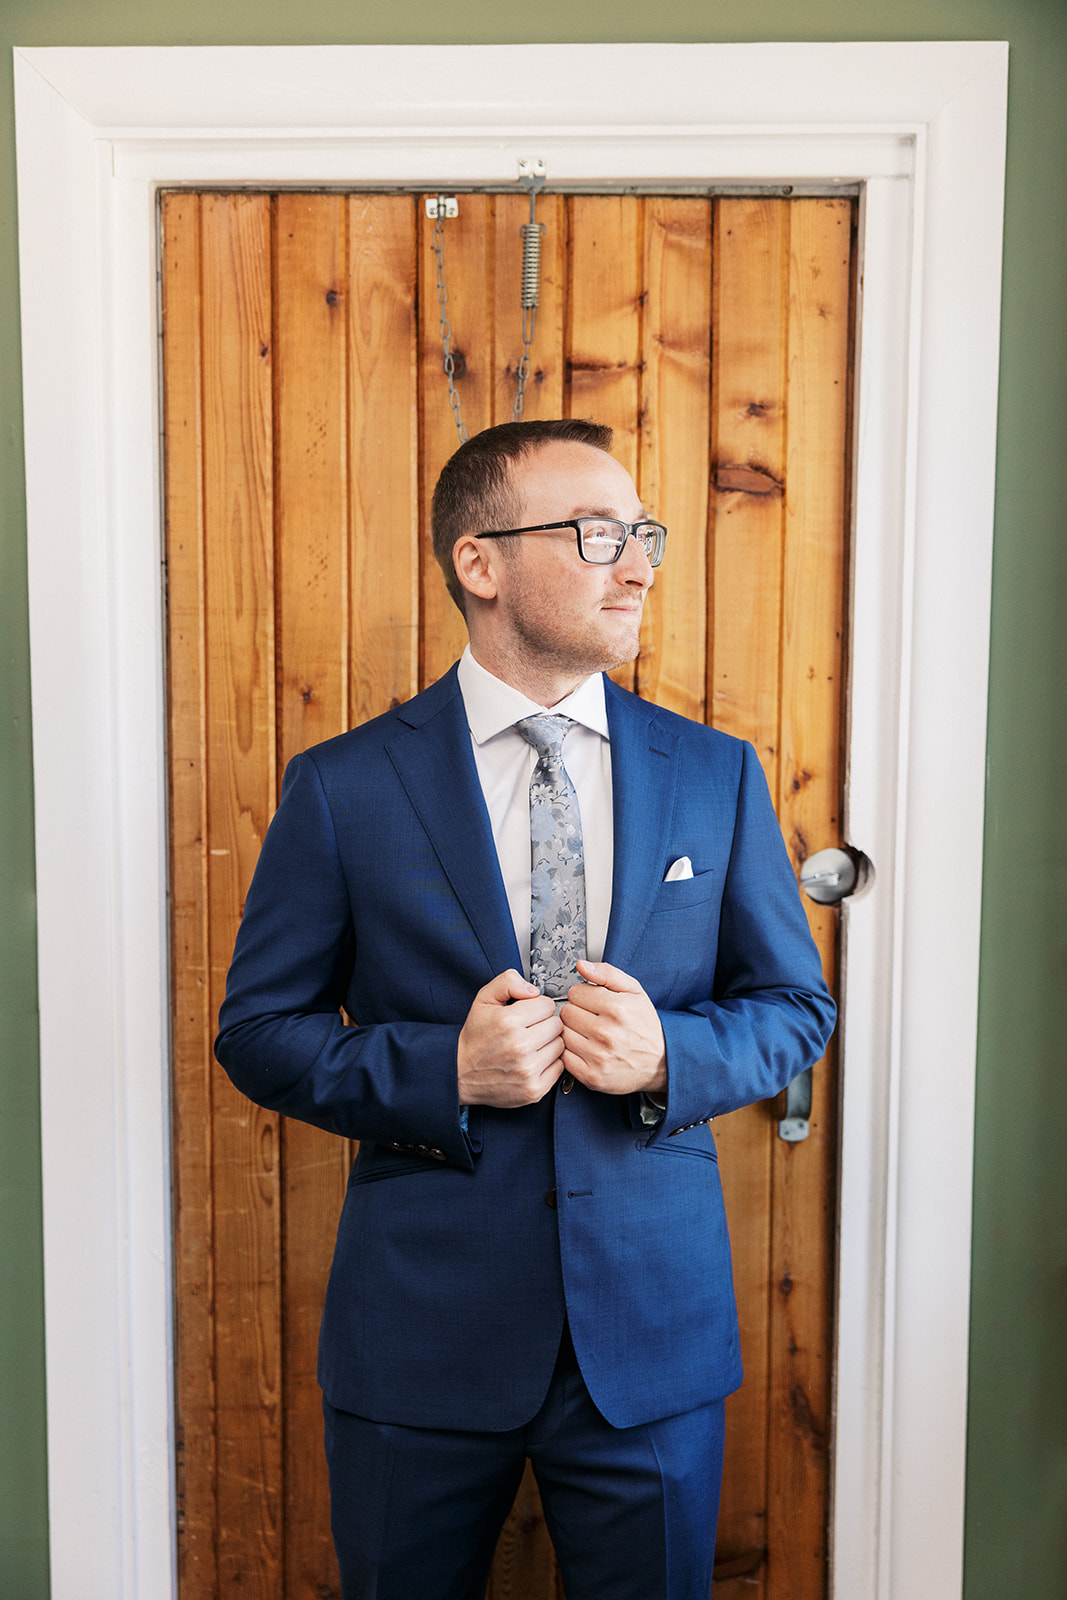 A groom in a blue suit stands in a doorway holding his lapels and looking out a window